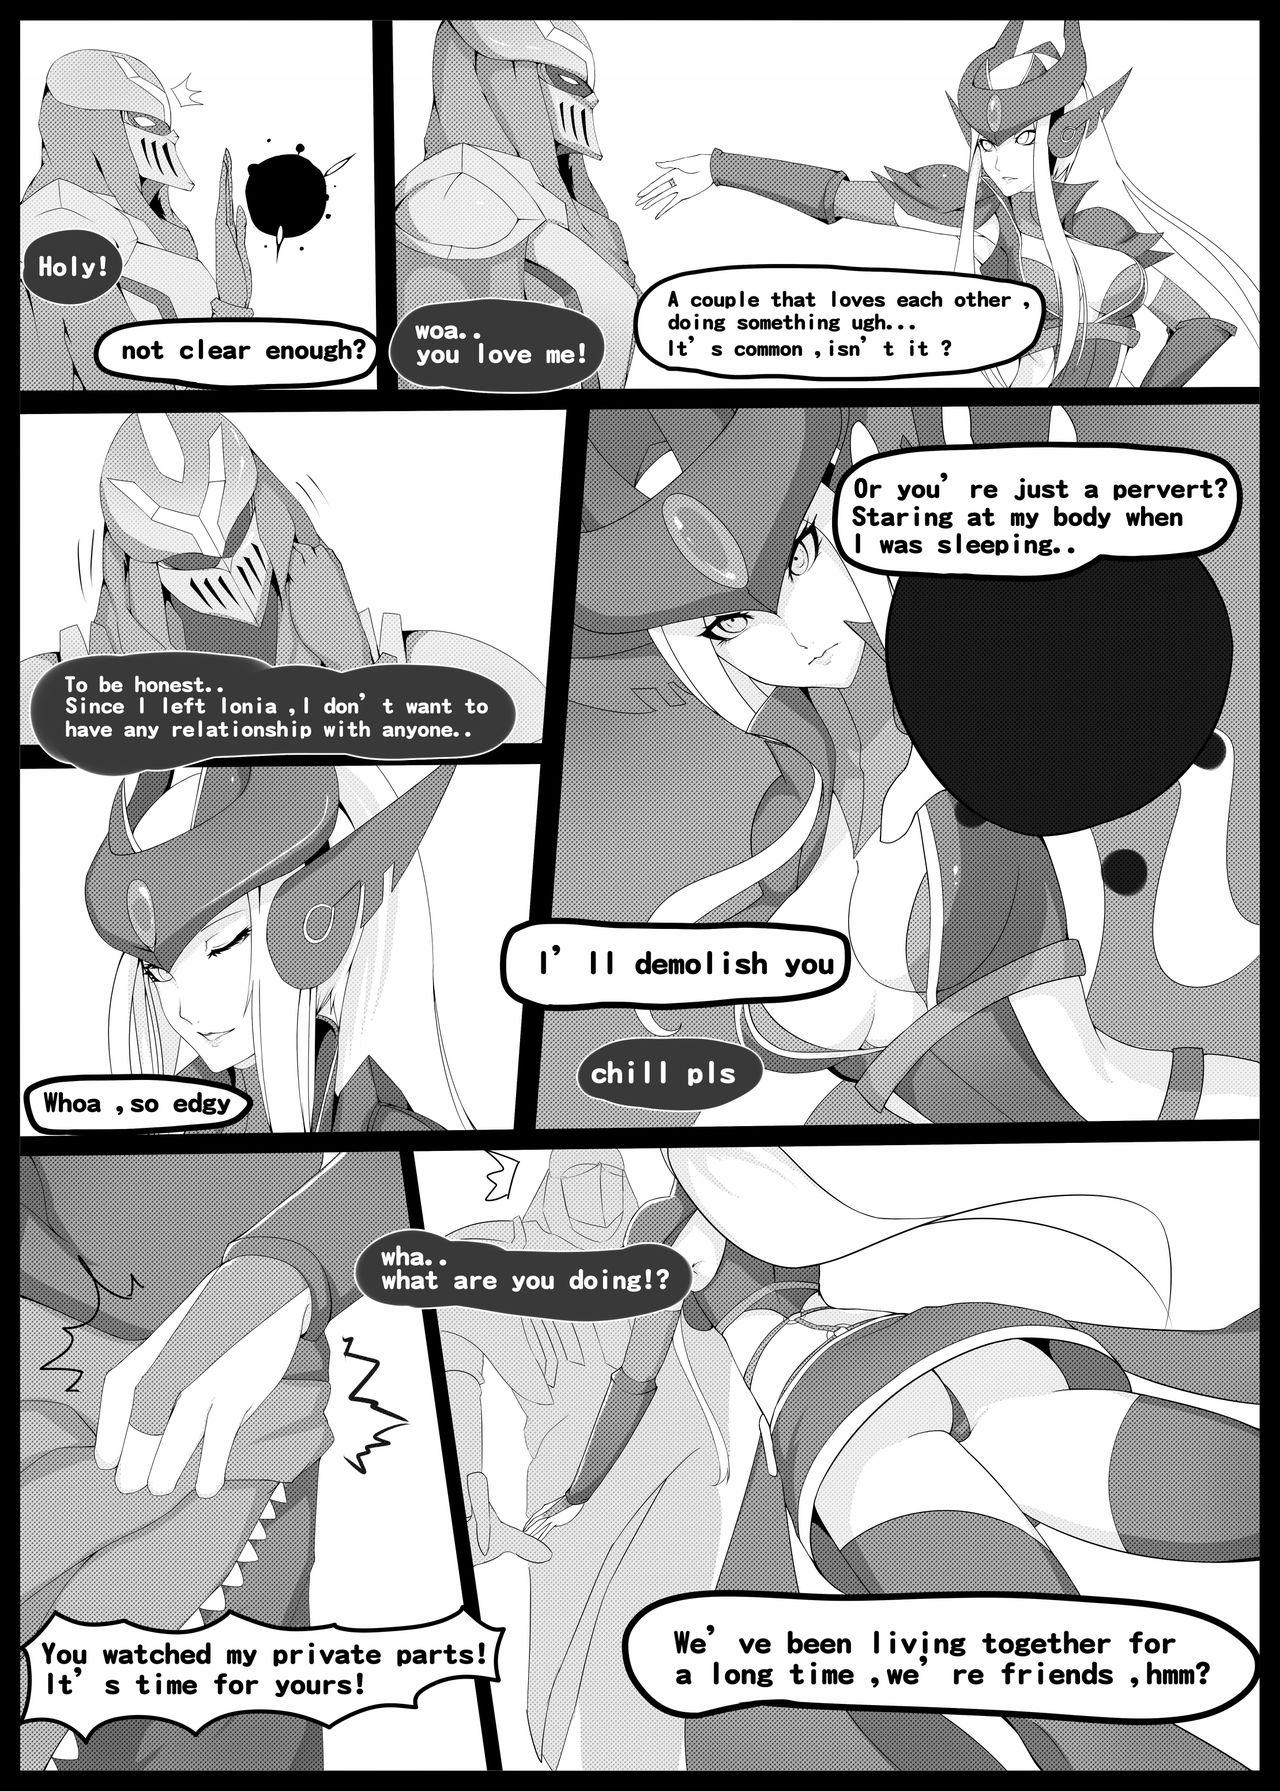 Mas Burst Lovers - League of legends Housewife - Page 6